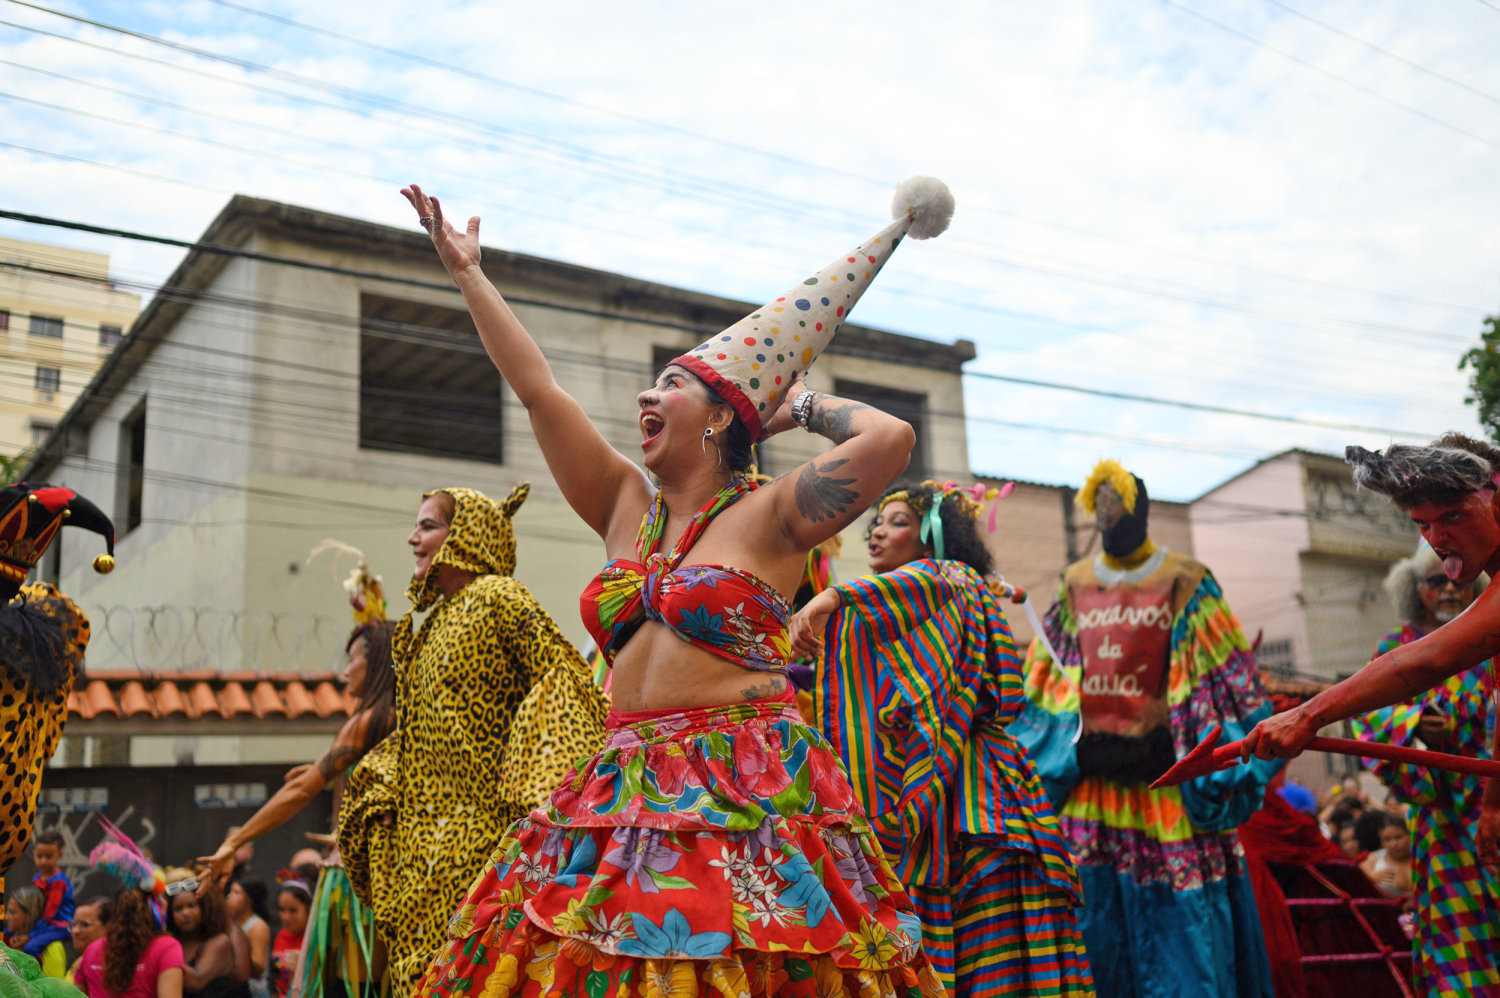 Brazil glitzy Carnival is back in full form after pandemic